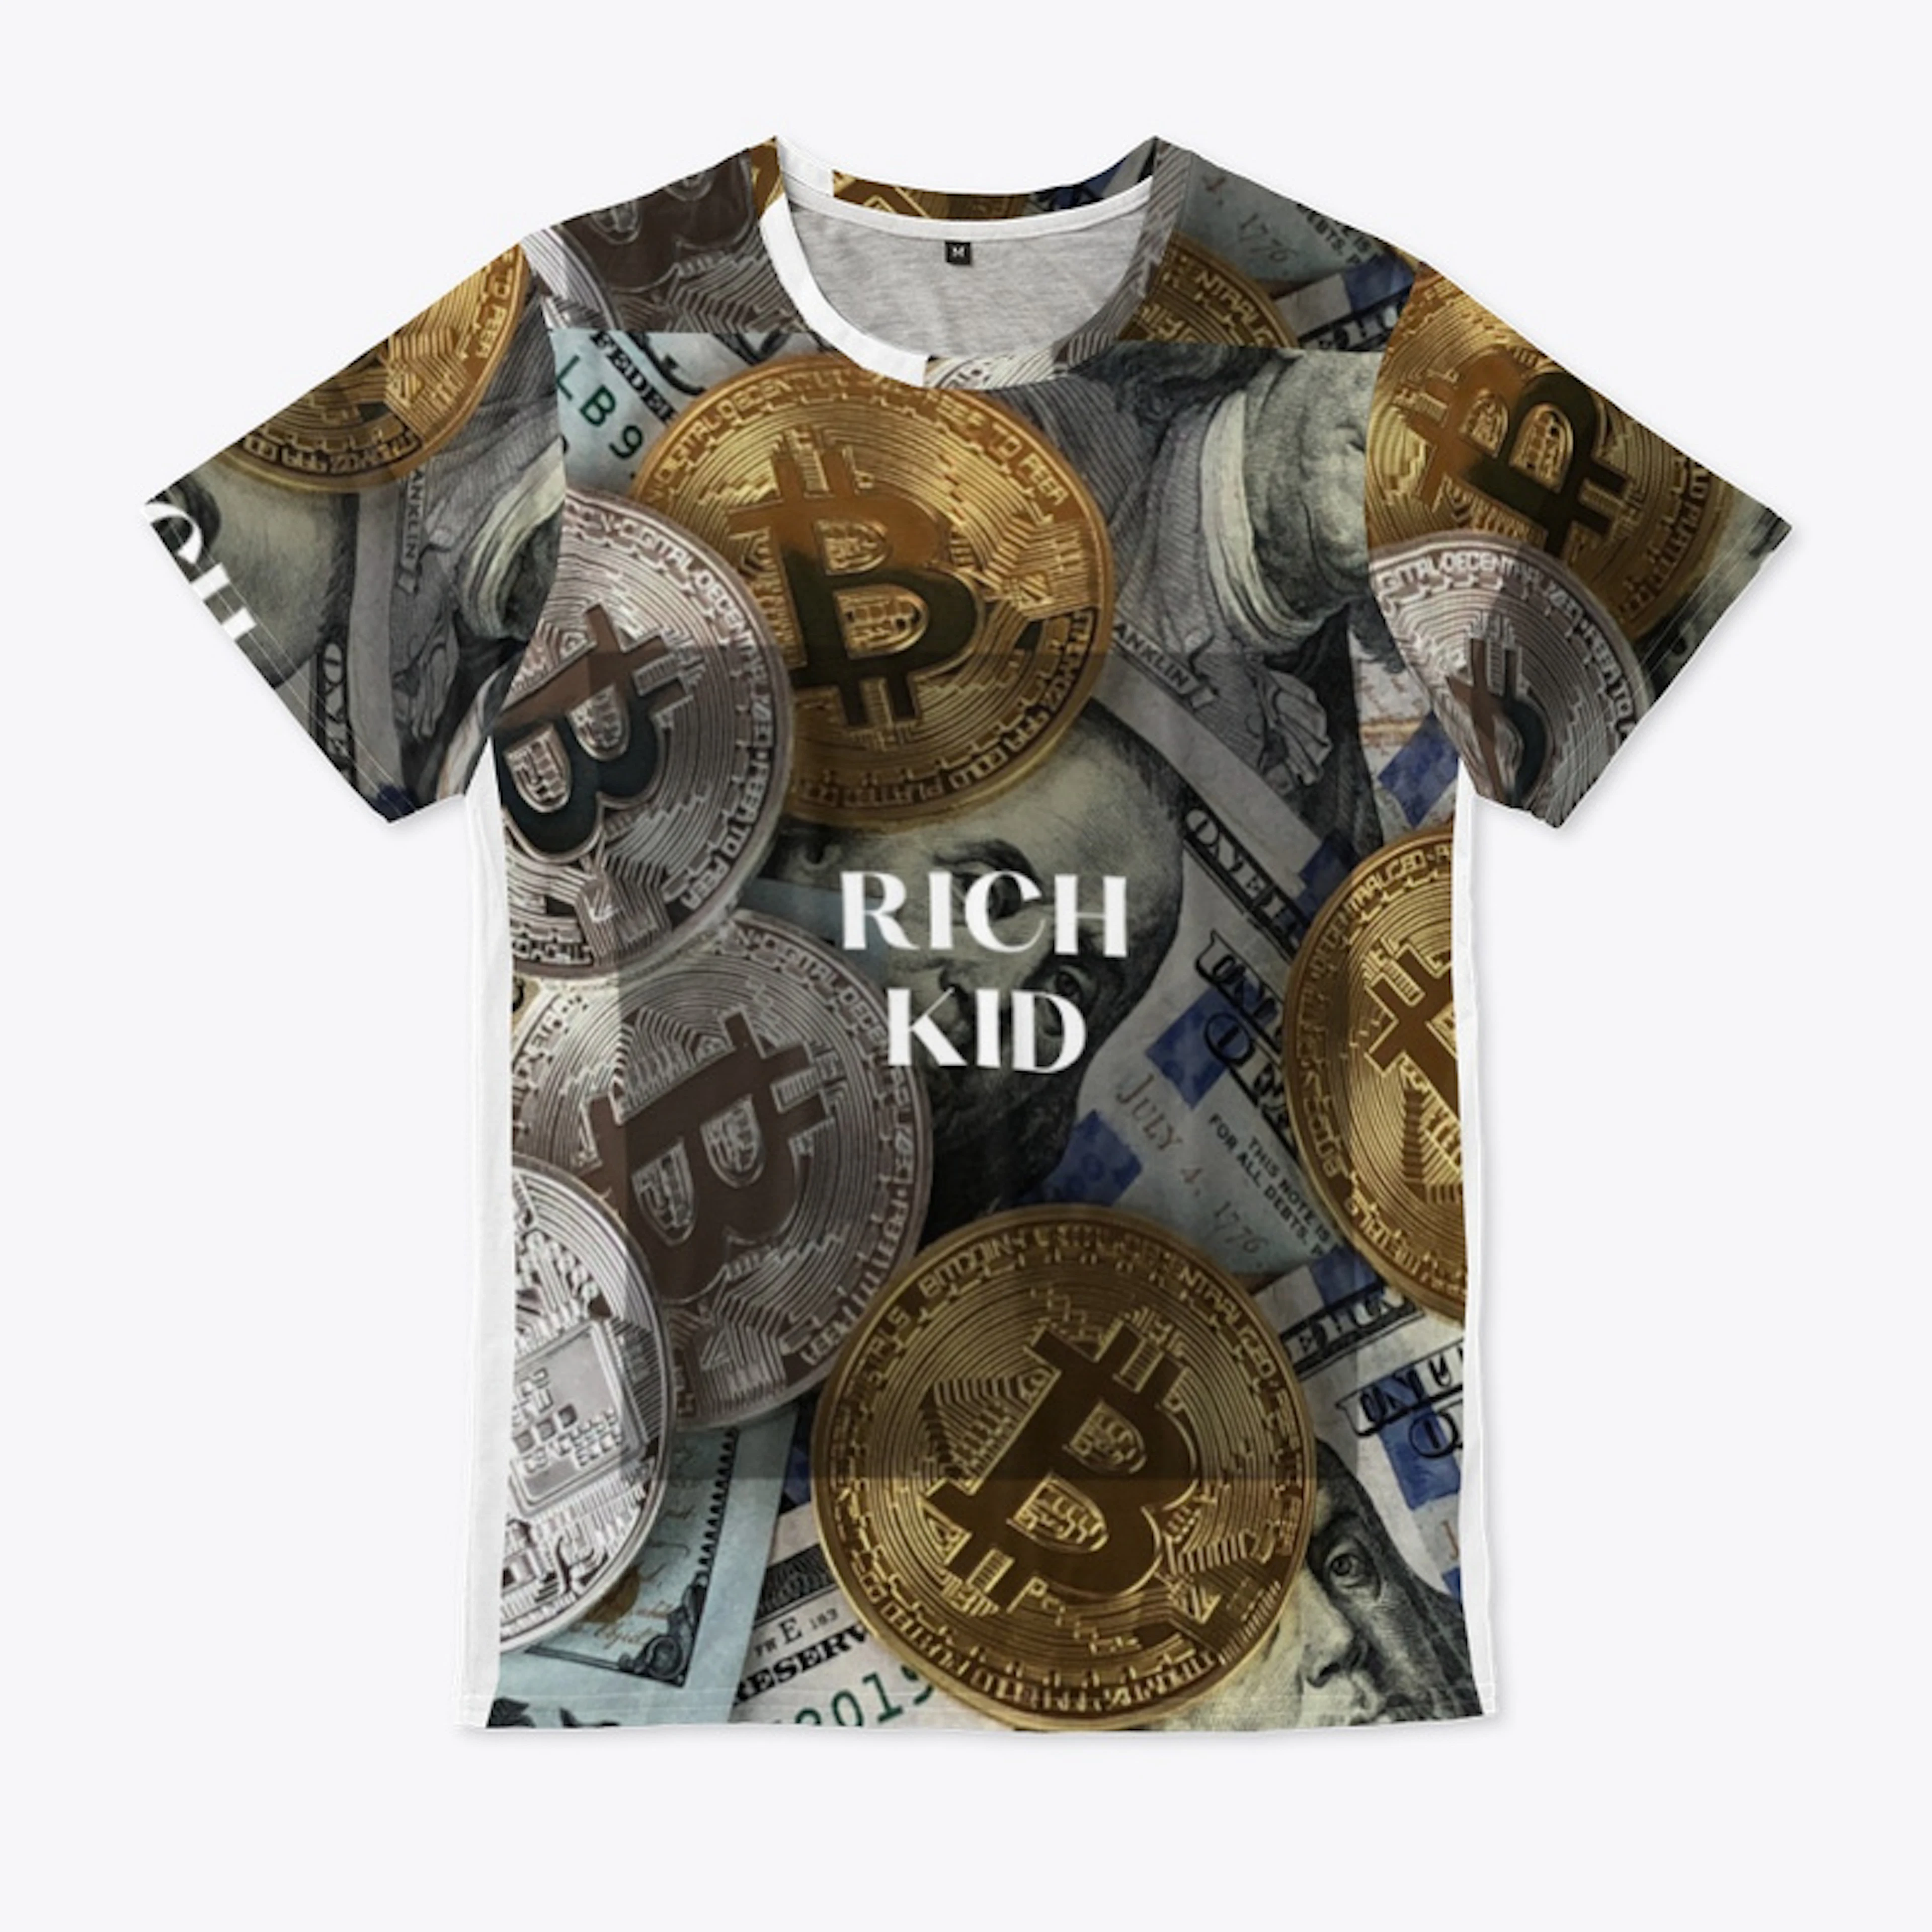 RICH KID ALL OVER PRINT UNISEX TEE